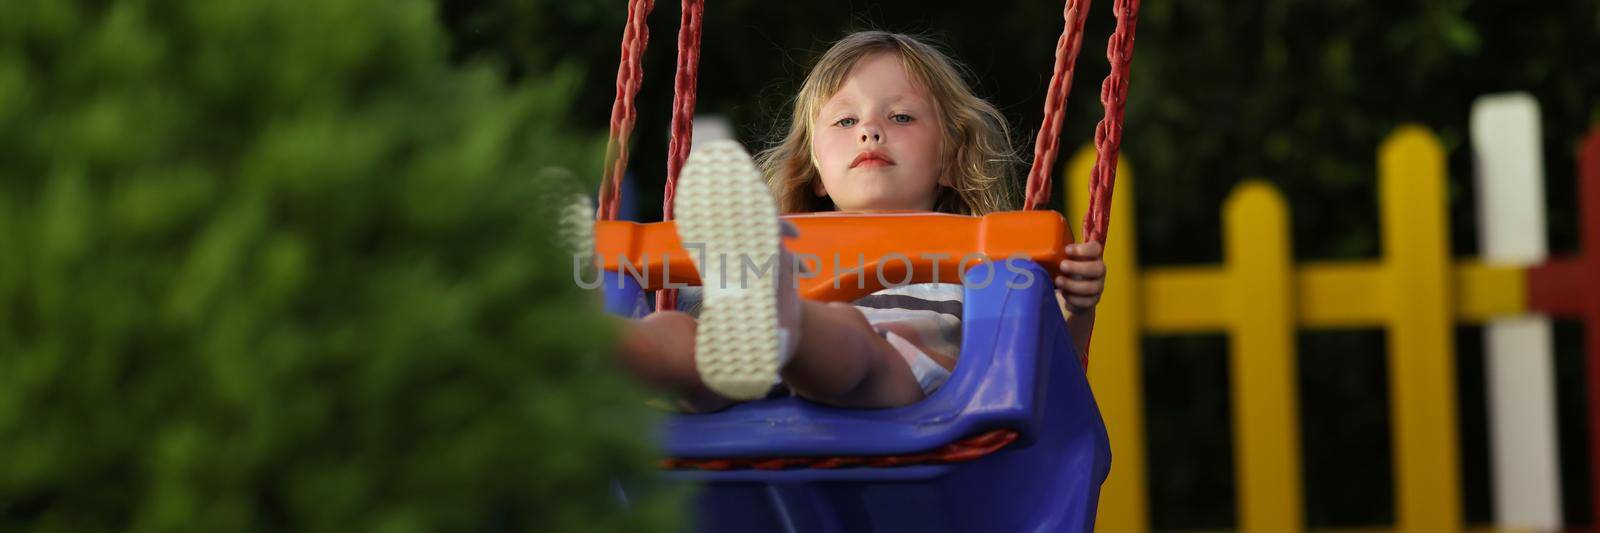 Little girl having fun on swing on playground in park alone by kuprevich